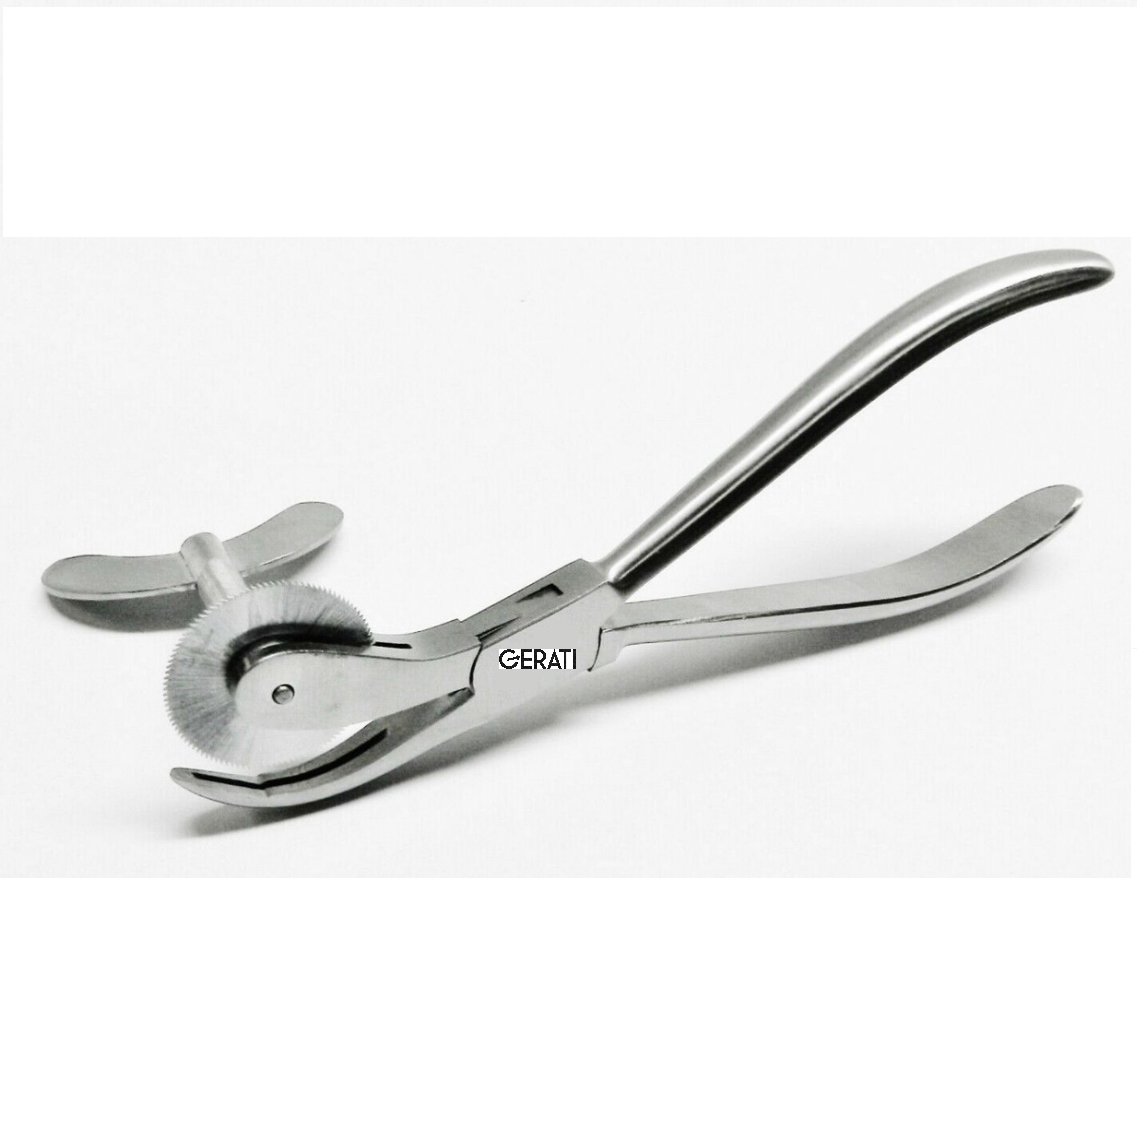 Ring cutter medical is used to cut through the rings when they get stuck in the swollen fingers.